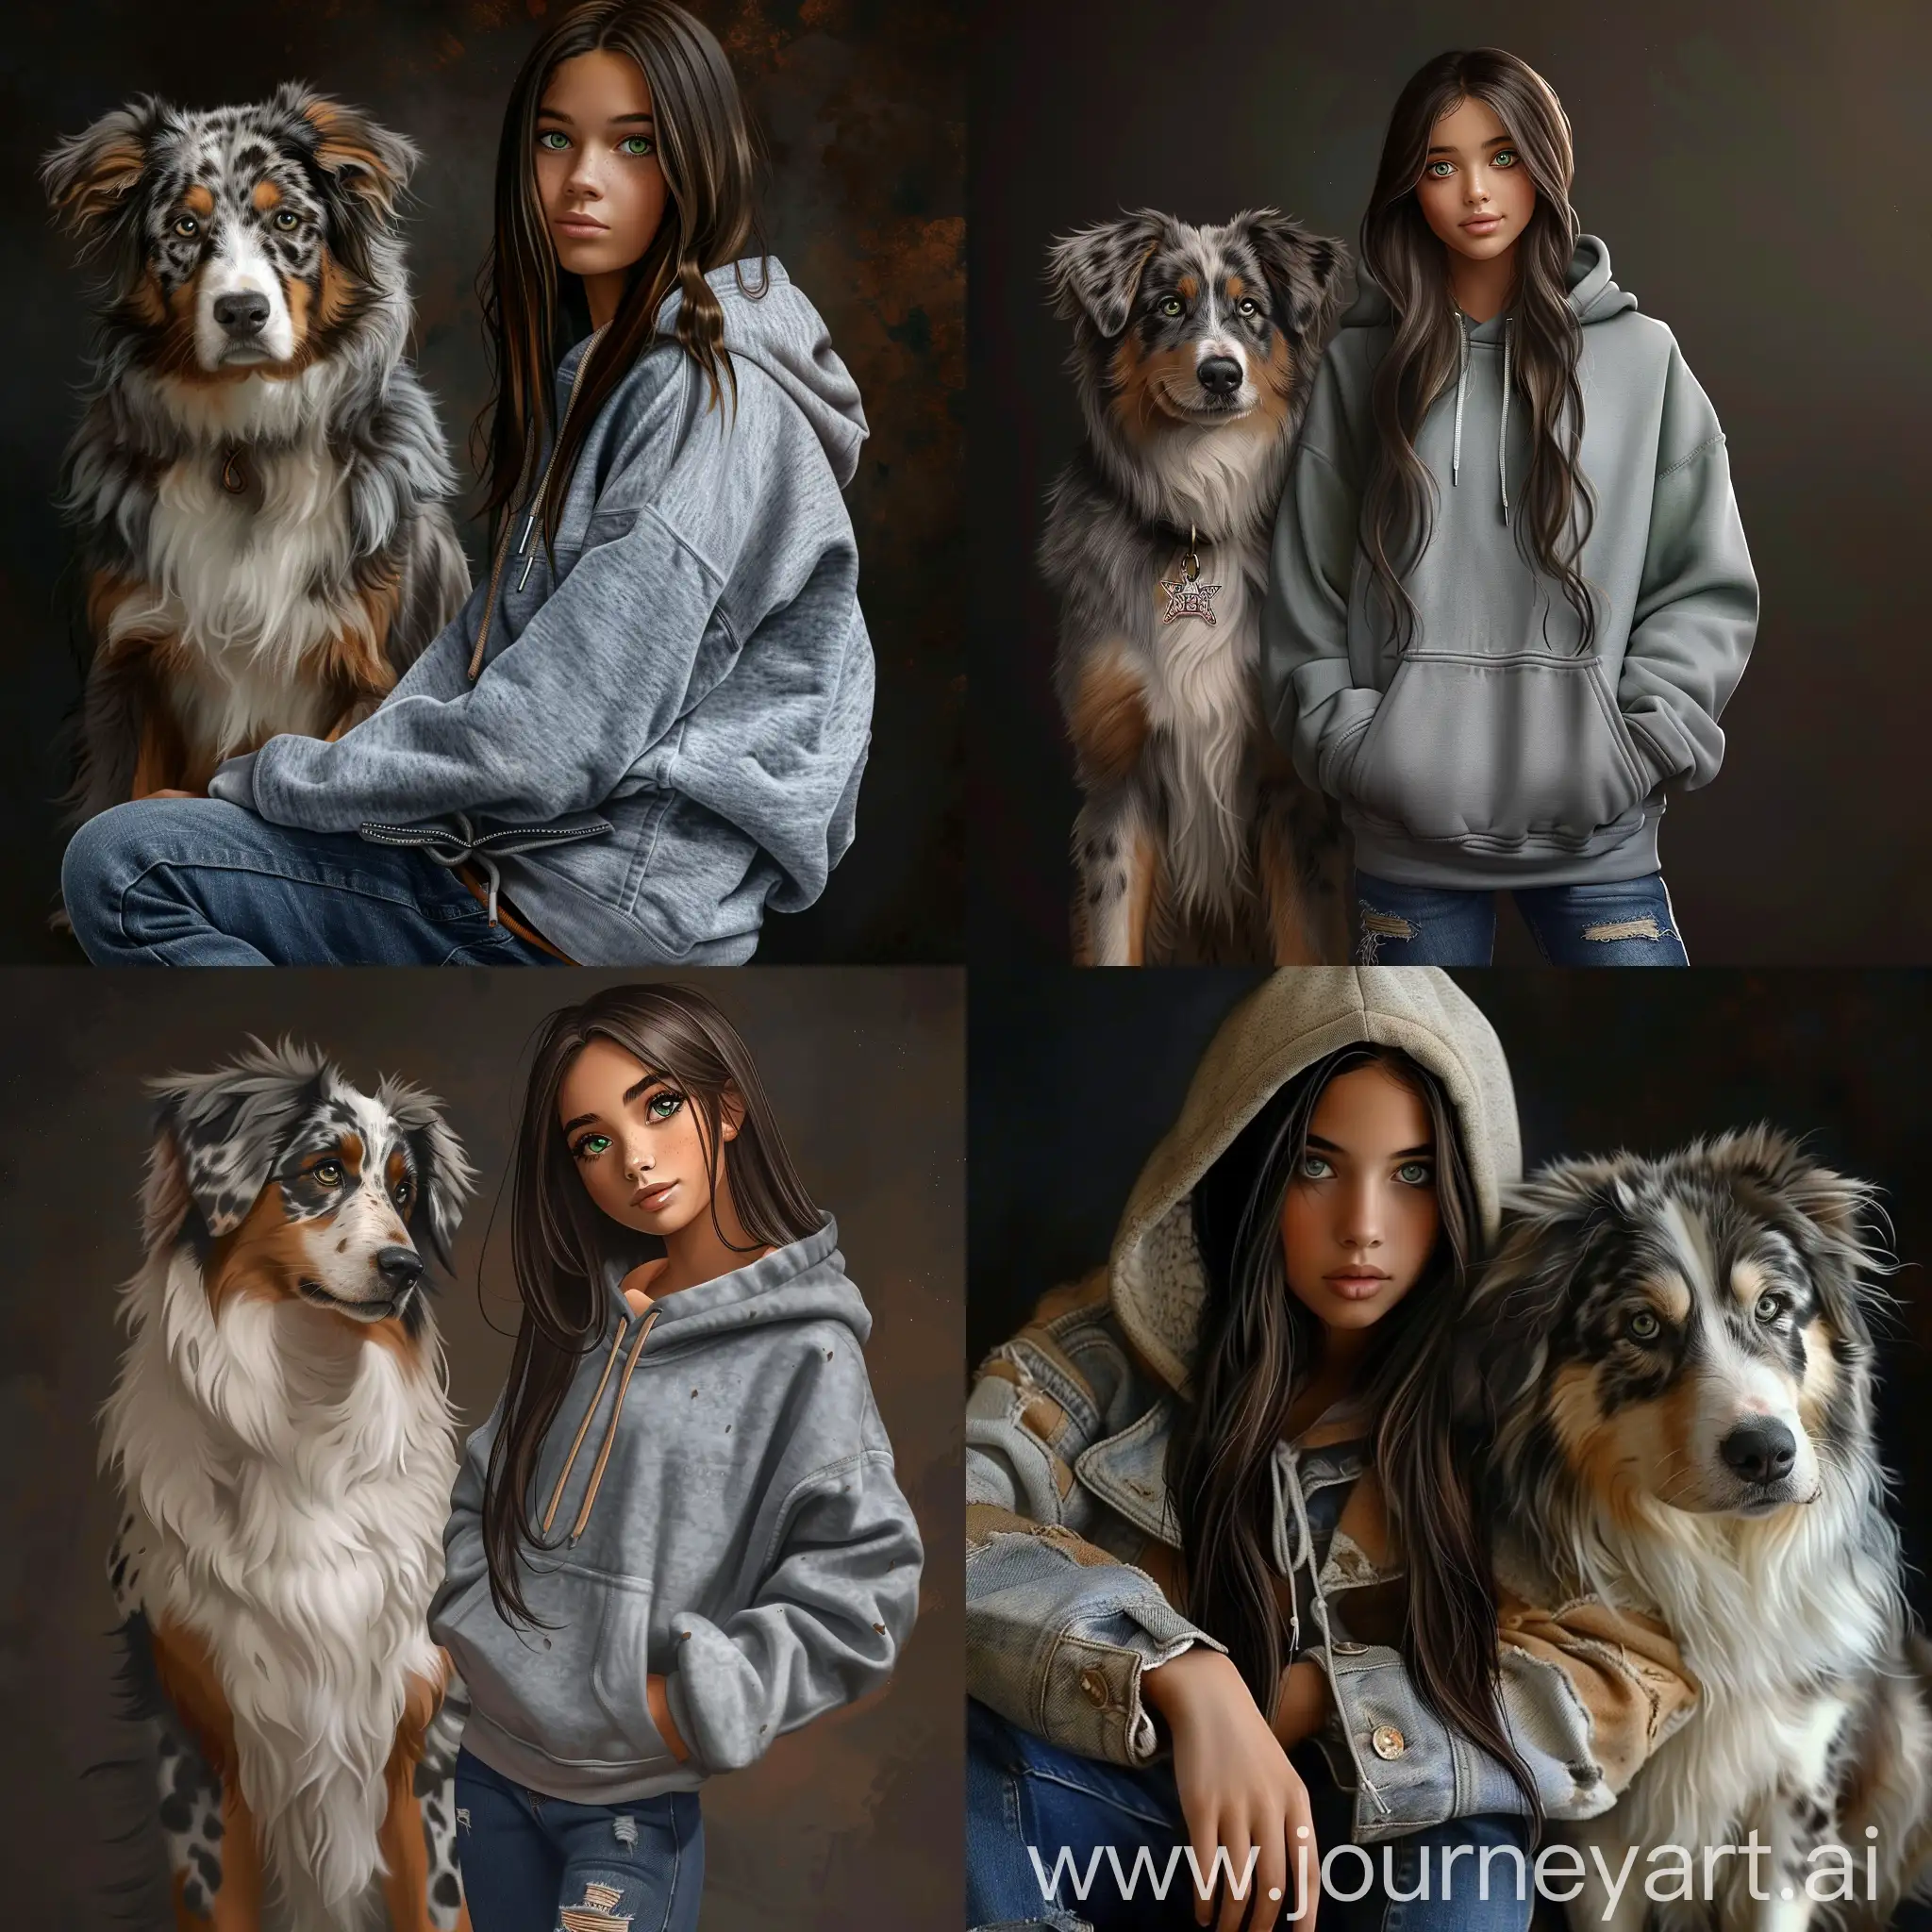 Beautiful girl, straight dark brown hair, gray-green eyes, white skin, teenager, 16 years old, dressed in jeans and an oversize hoodie, next to an Australian shepherd, high quality, high detail, dark background, realistic art